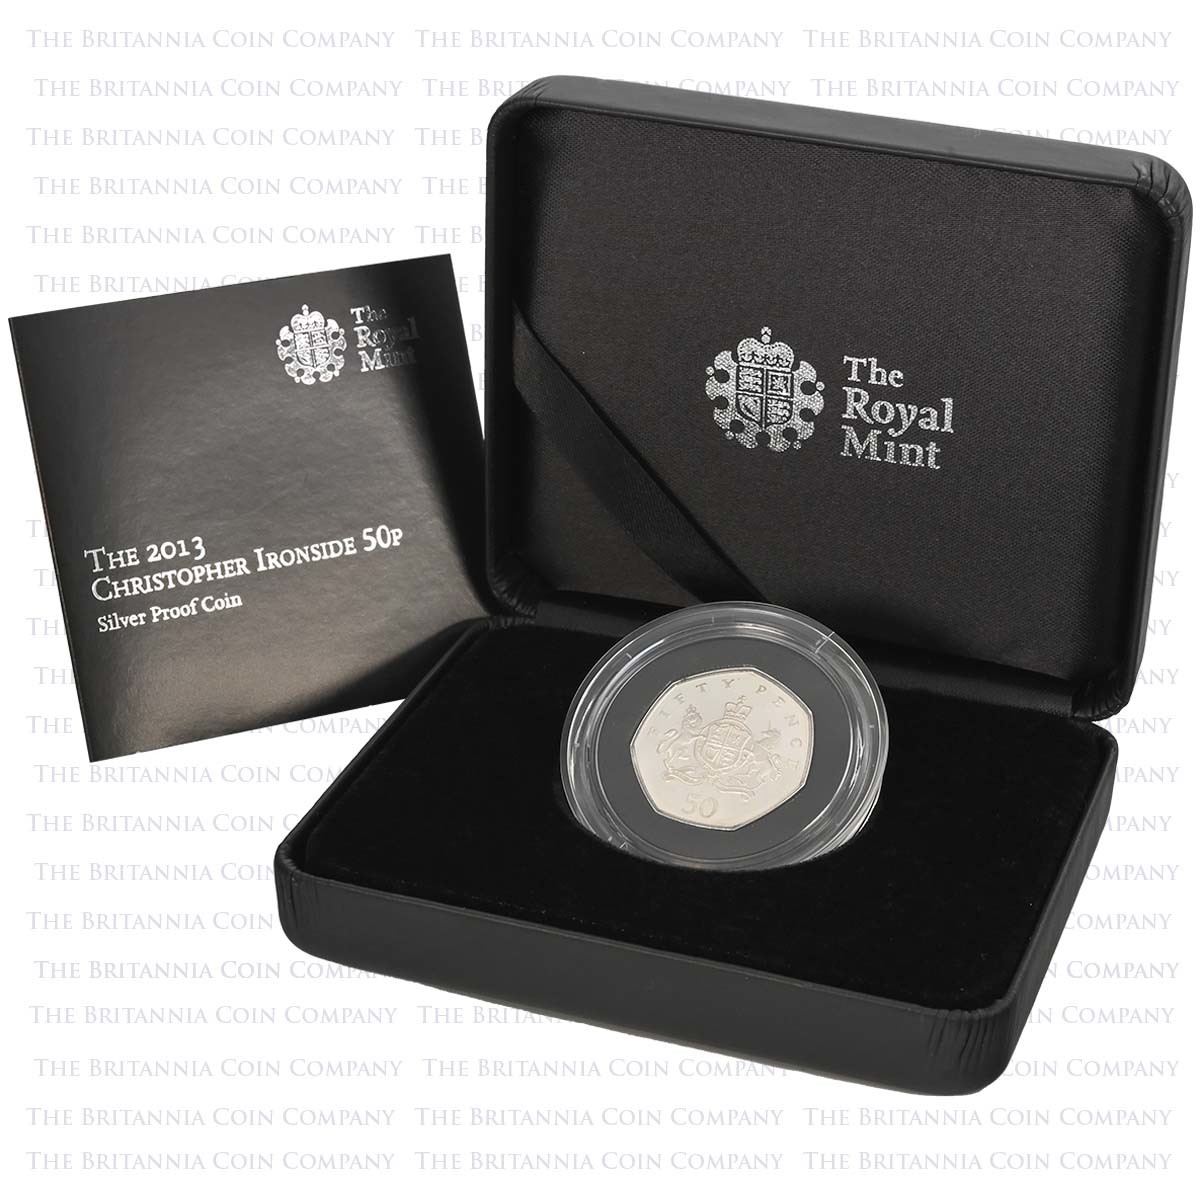 UK13RSSP 2013 Christopher Ironsides Britannia 50p Silver Proof Boxed